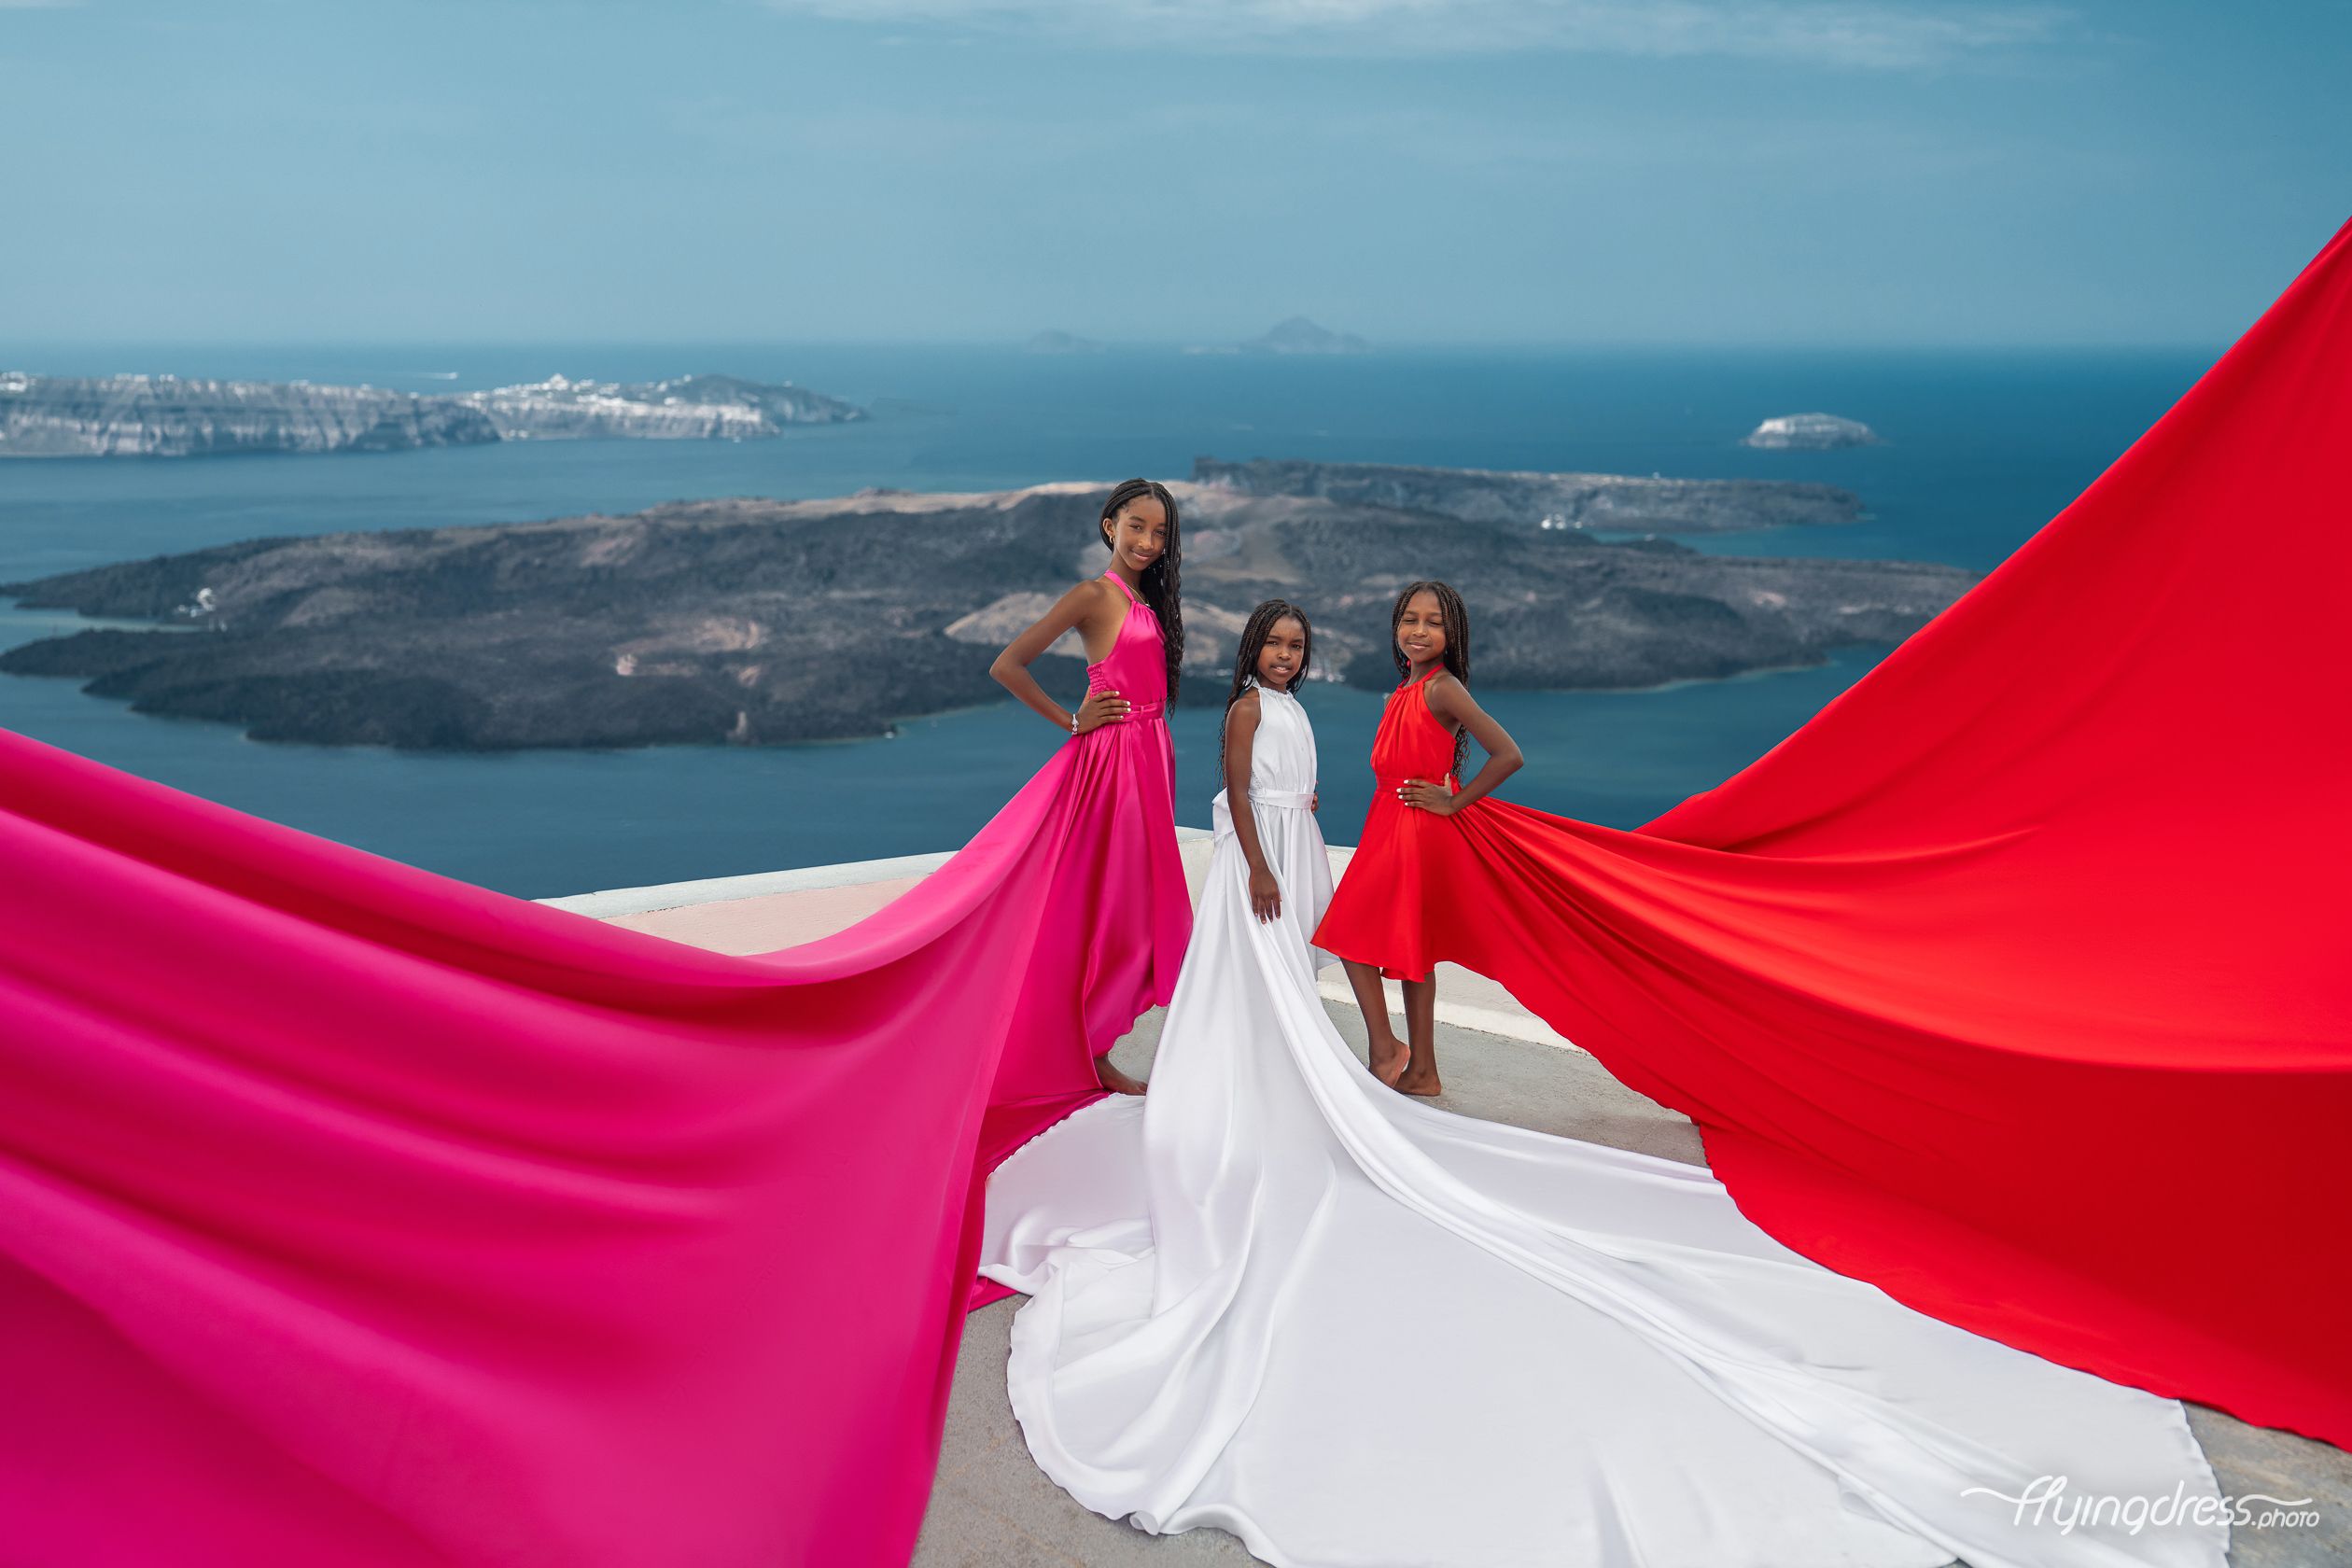 Captivating trio of girls in fuchsia, white, and red flying dresses in Santorini